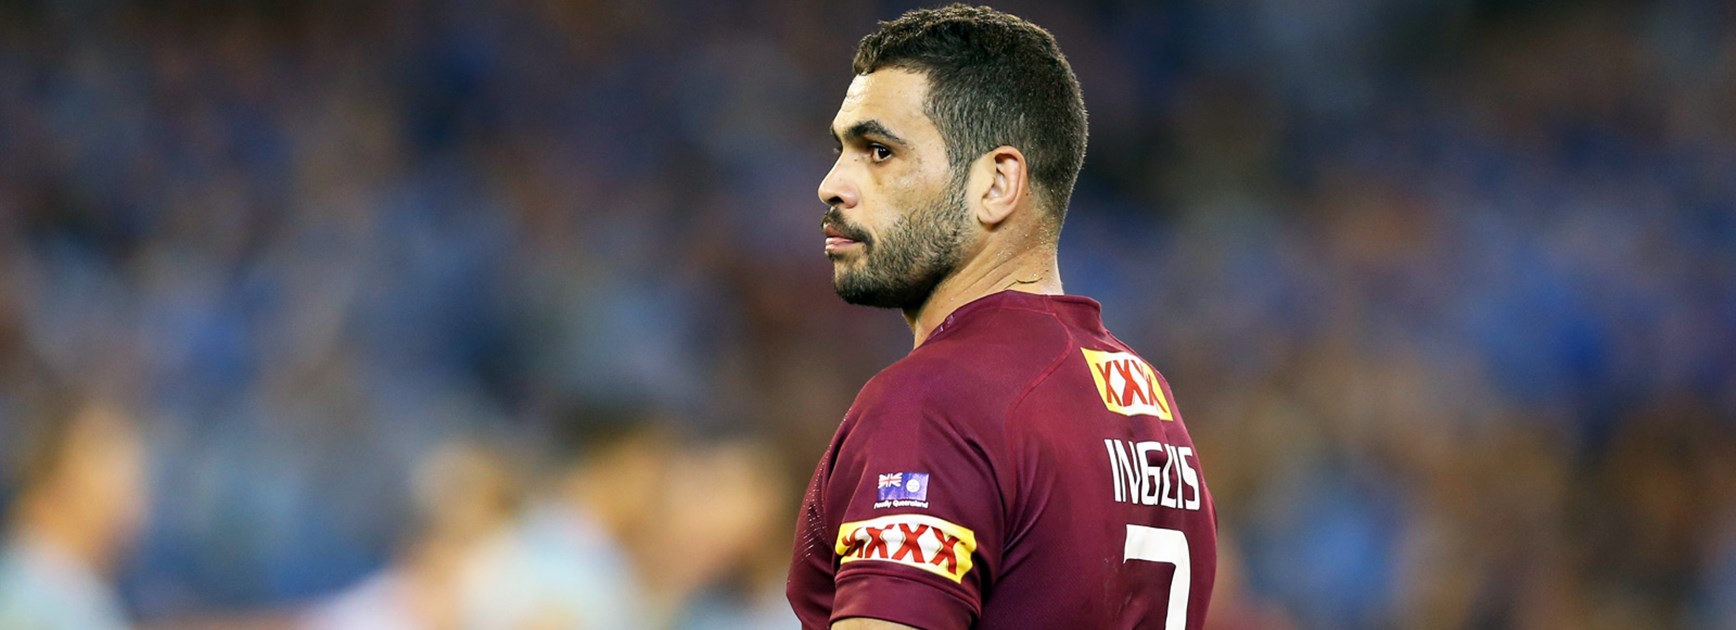 Greg Inglis is confident in his ability to lead the Maroons from fullback in Origin III.